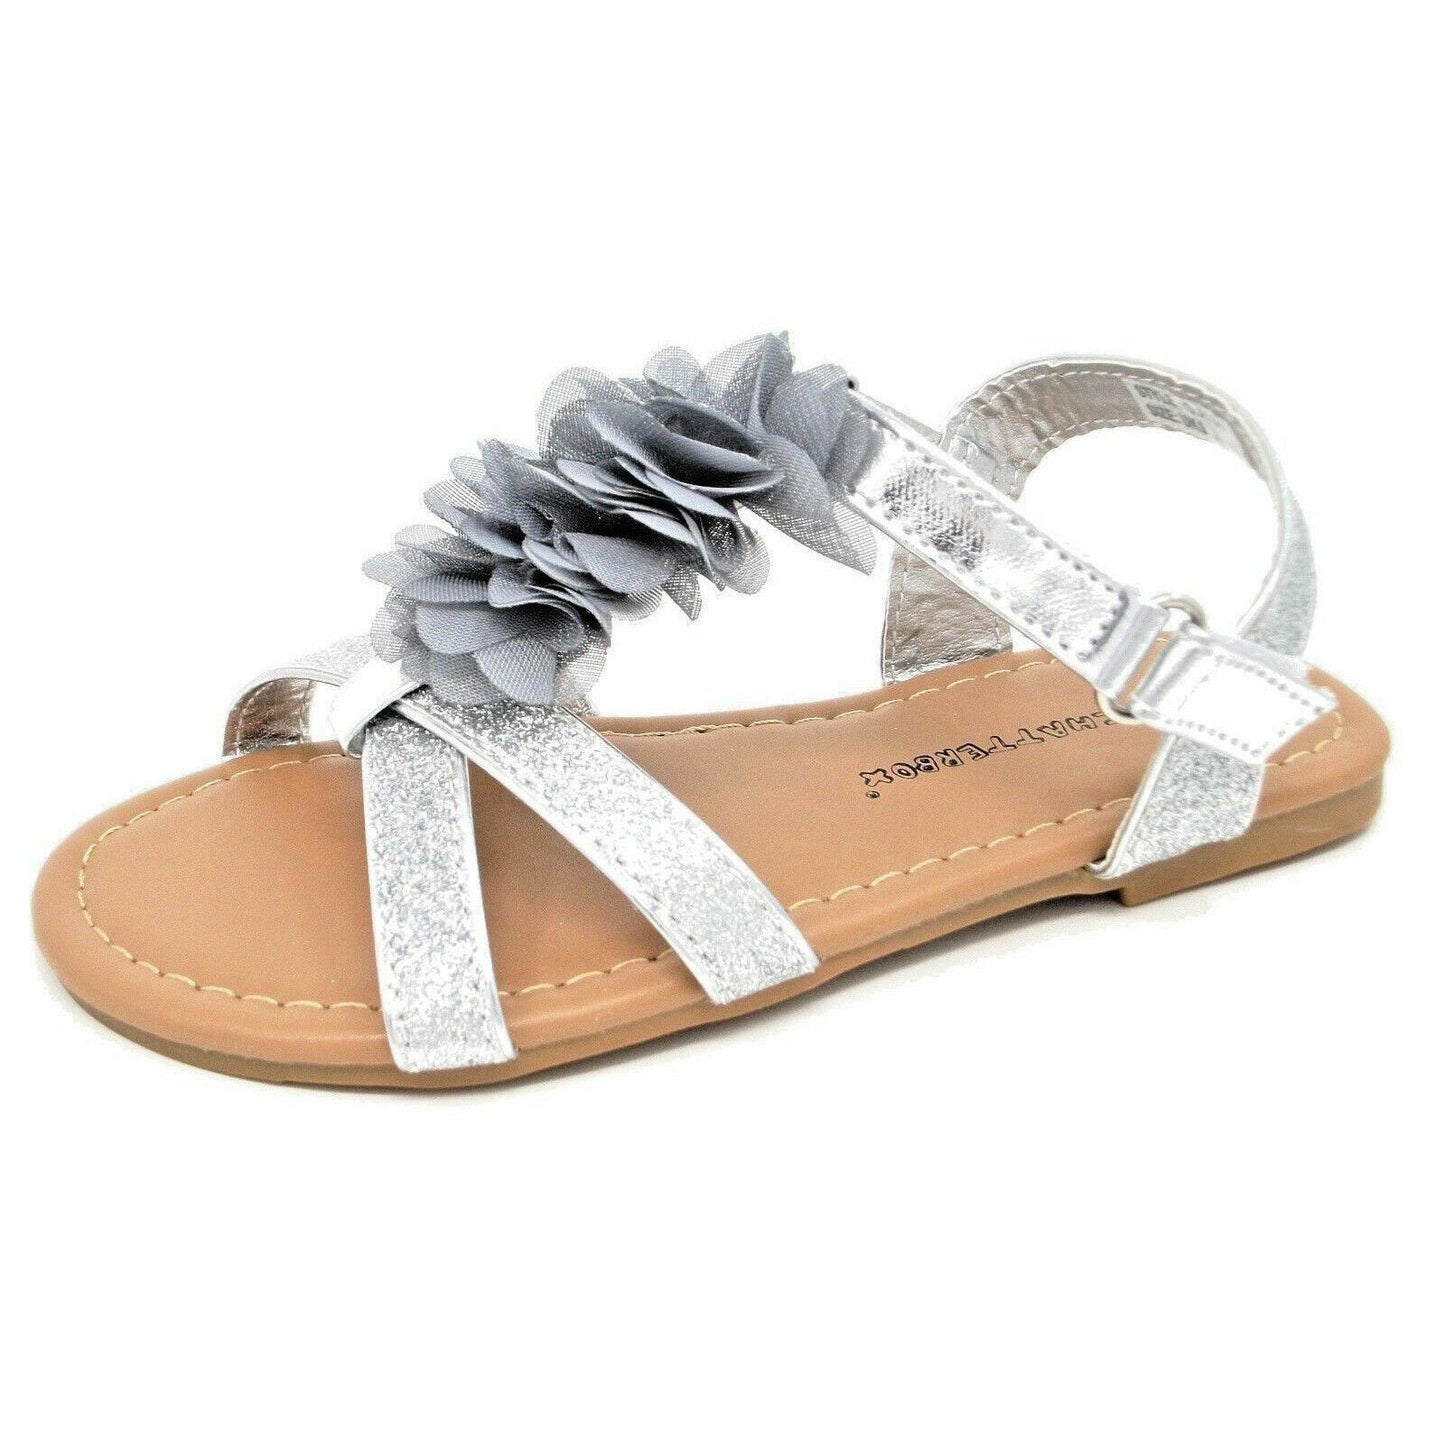 GIRLS CHILDREN SUMMER SANDALS CASUAL HOLIDAY FLAT PARTY PRINCESS FLIP FLOP SHOES